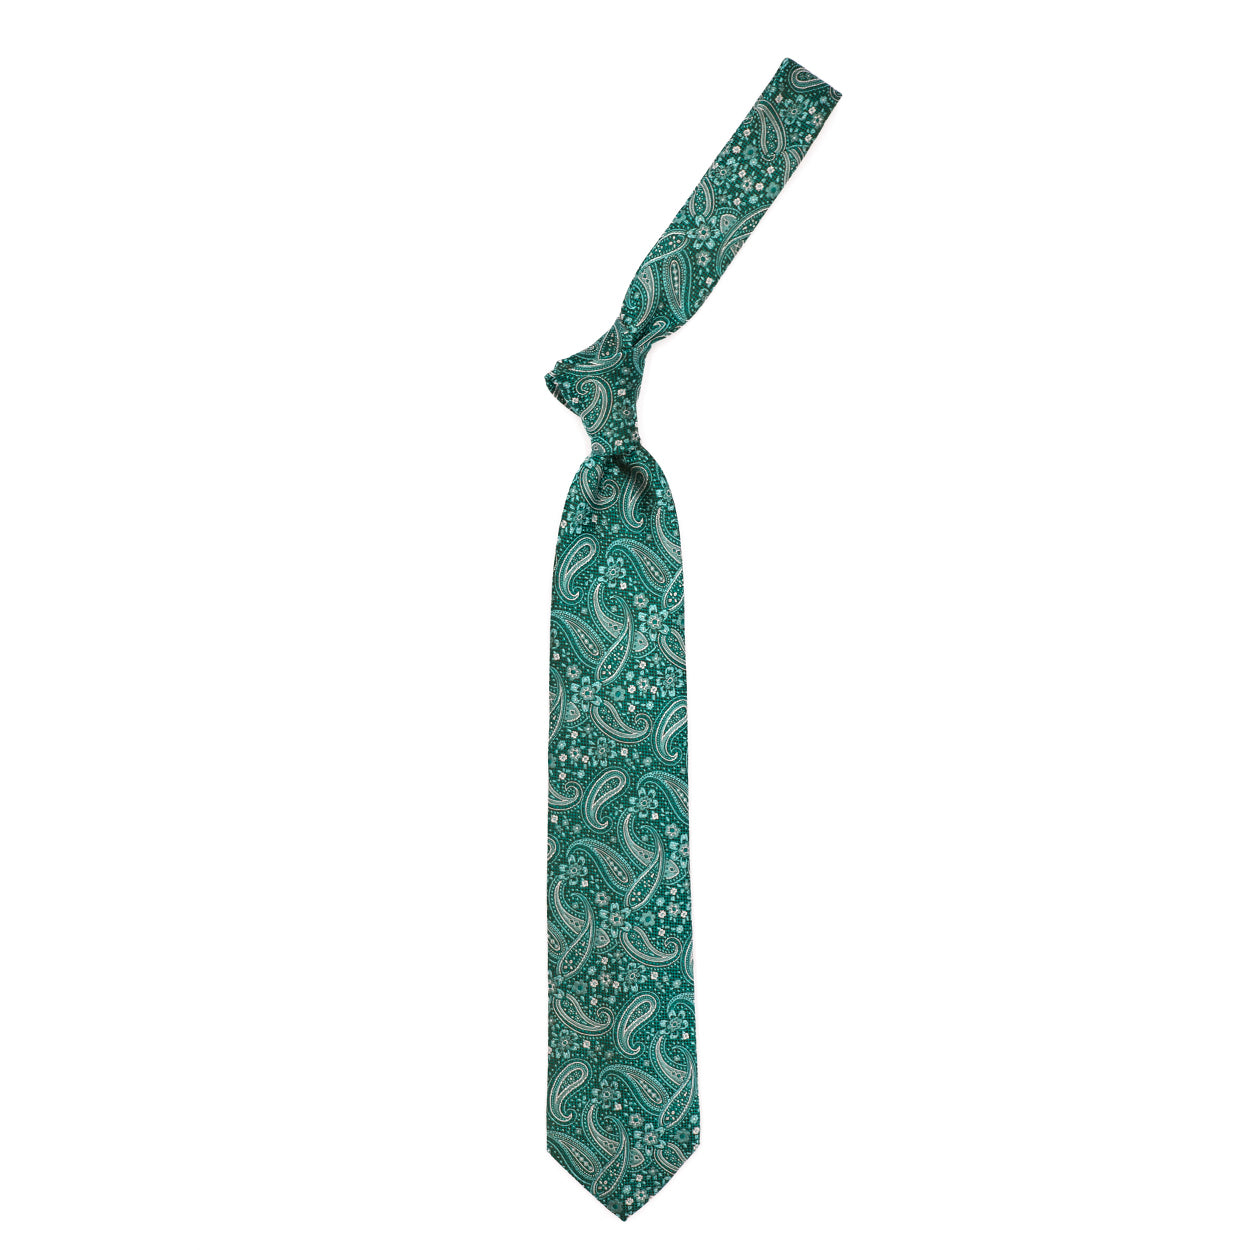 Green tie with paisley